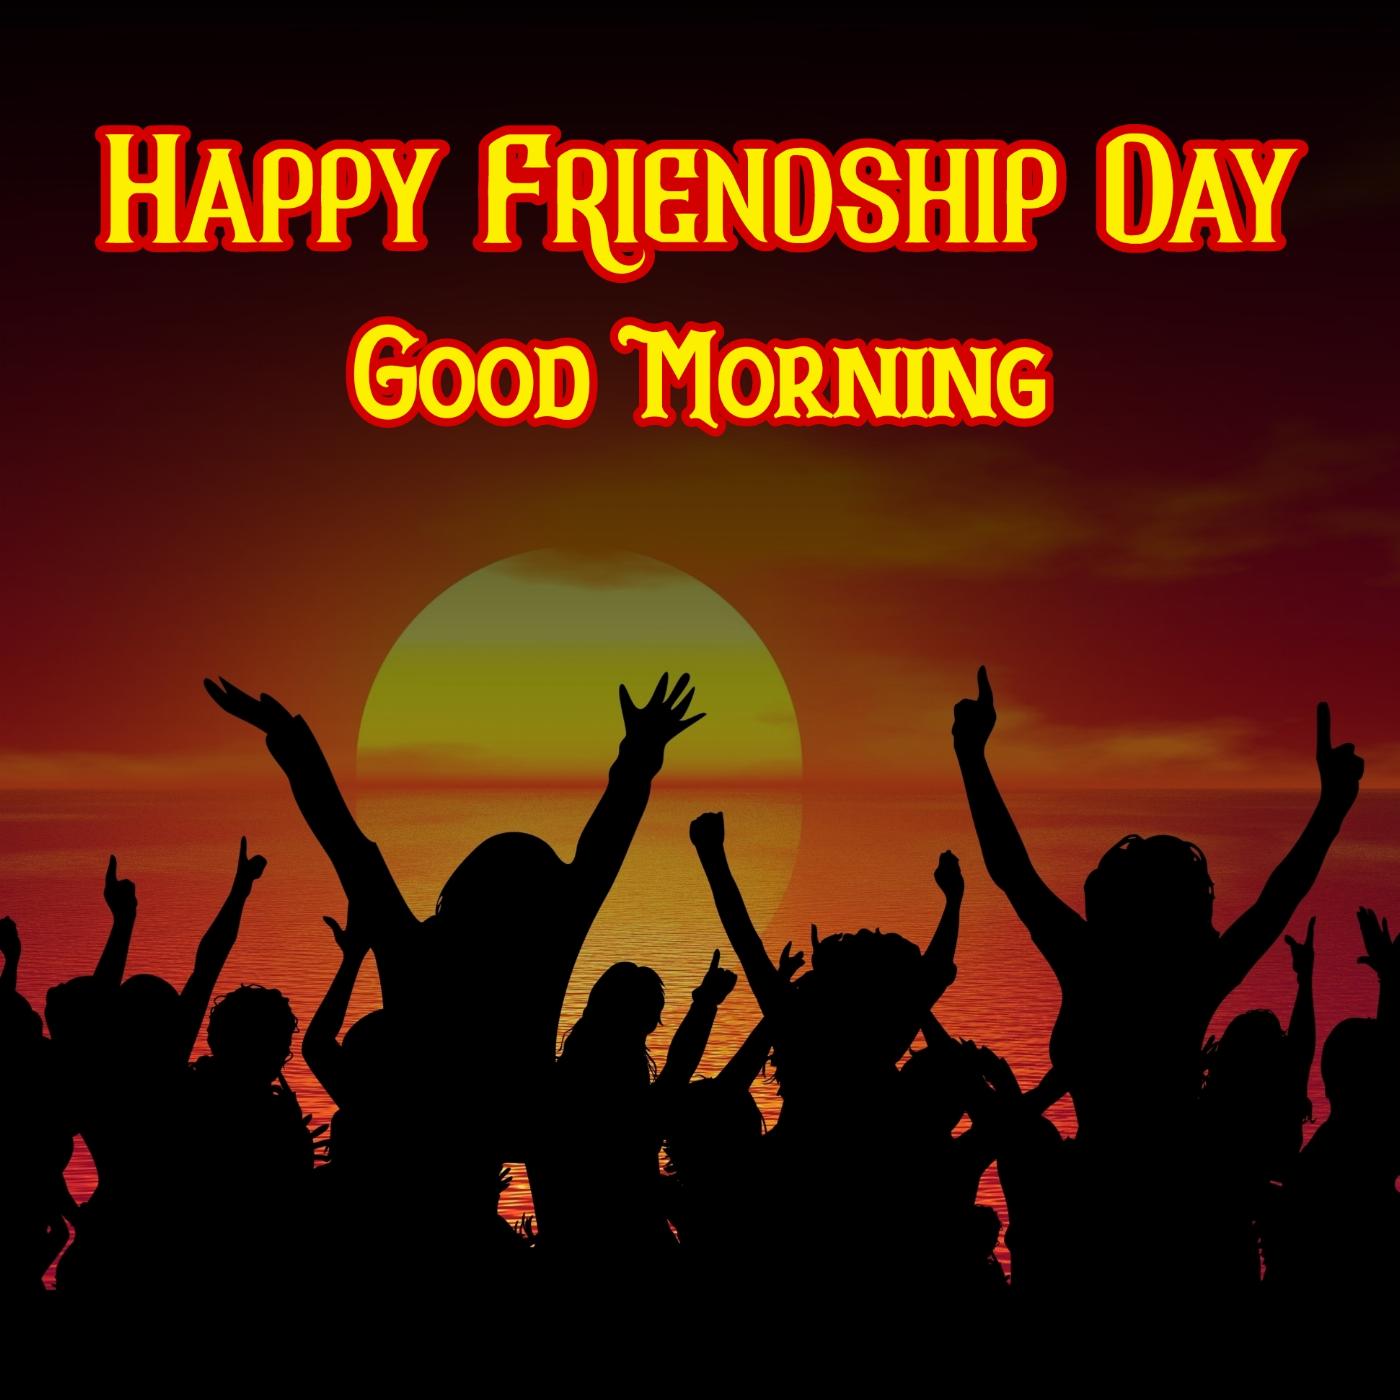 Happy Friendship Day Good Morning Images